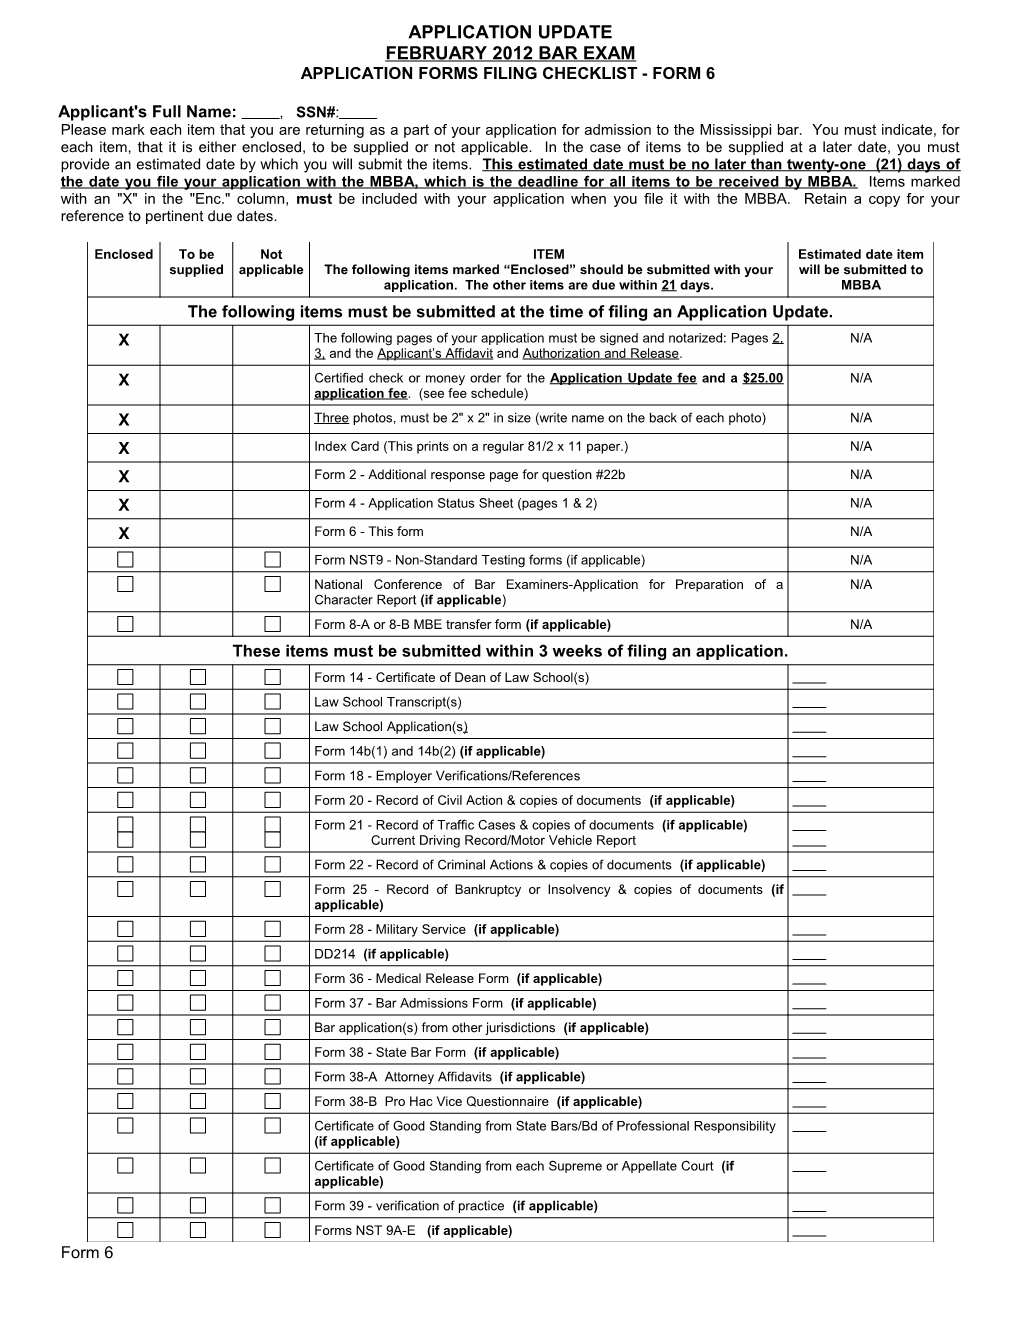 Application Forms Filing Checklist